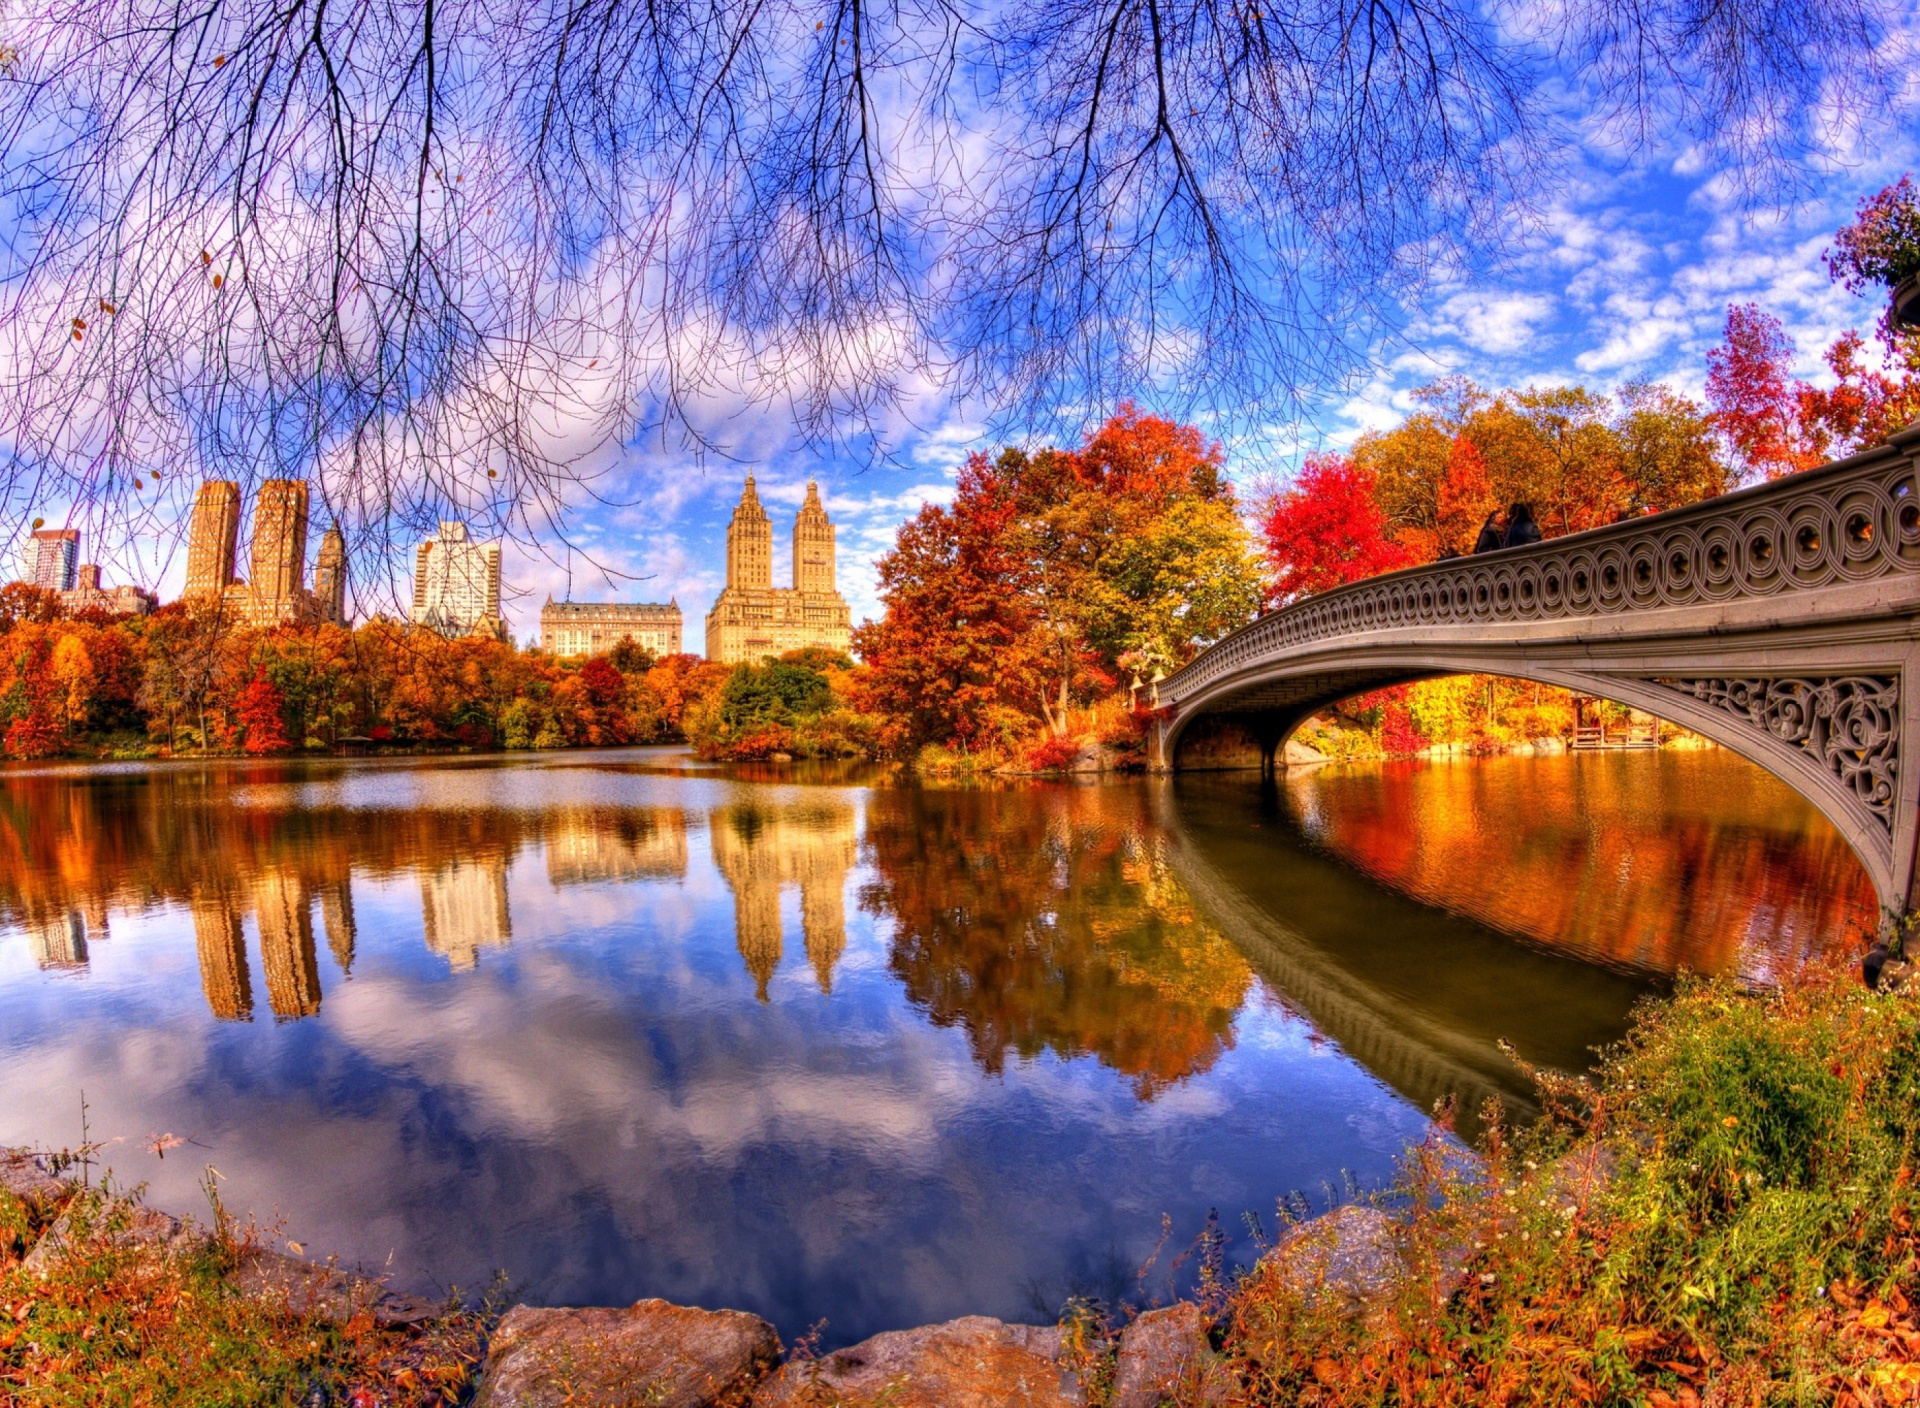 Architecture Reflection in Central Park screenshot #1 1920x1408